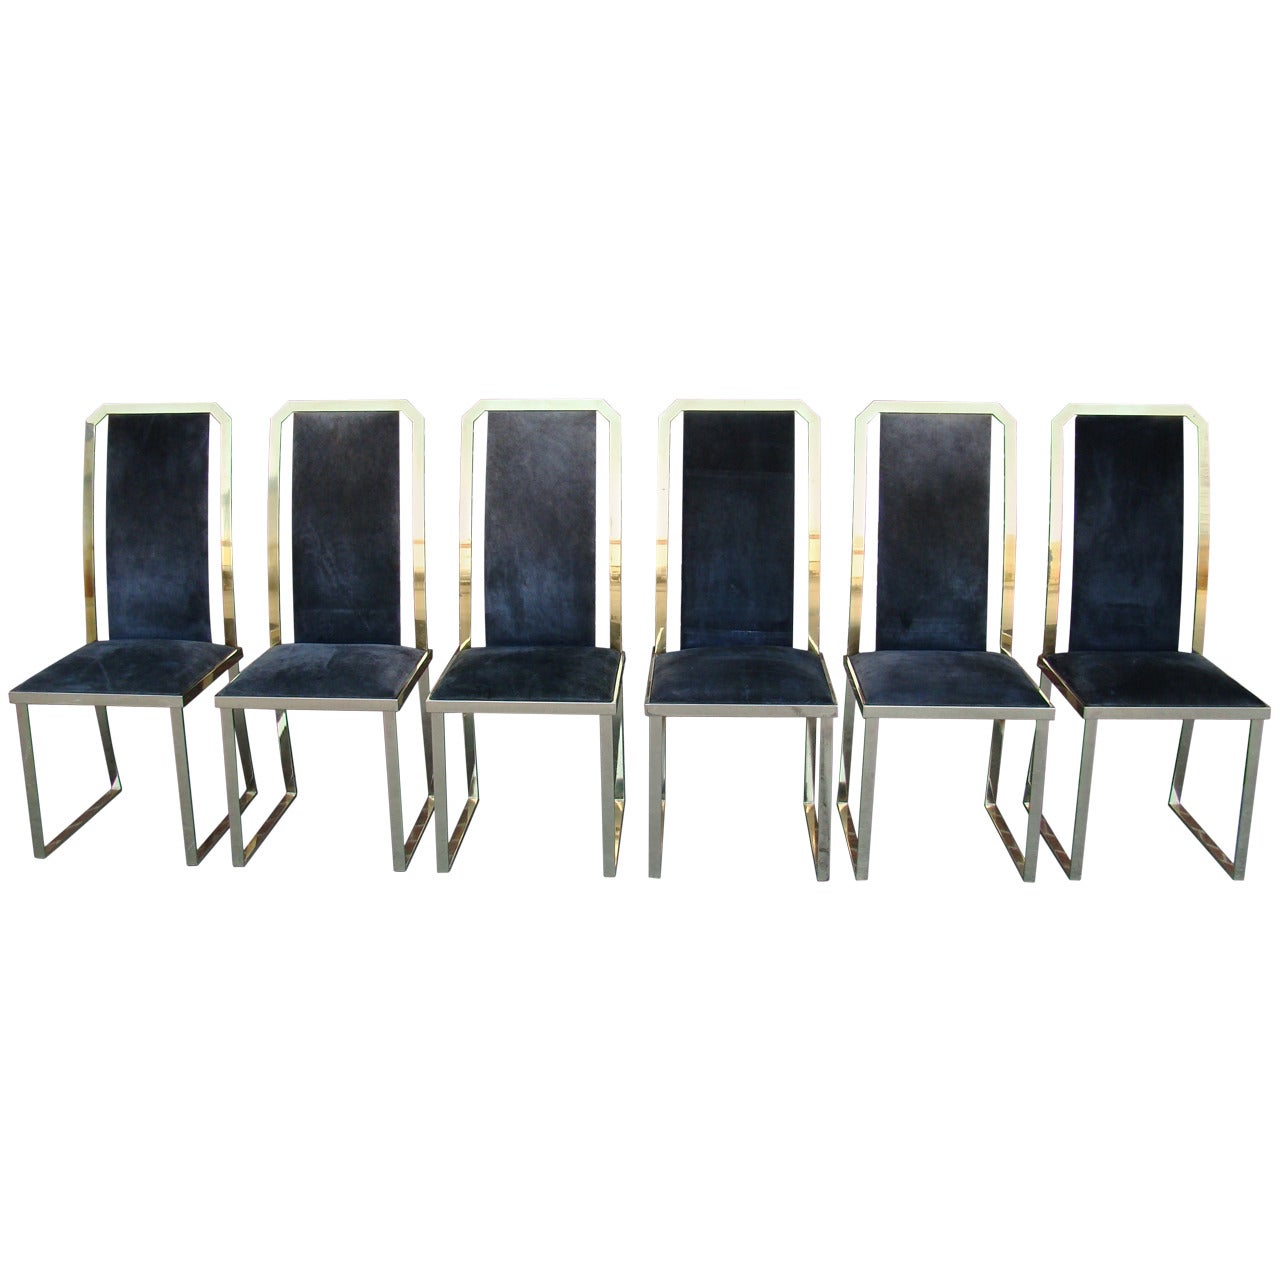 Set of Six Brass and Split Cowhide High Back Chairs by Roche Bobois